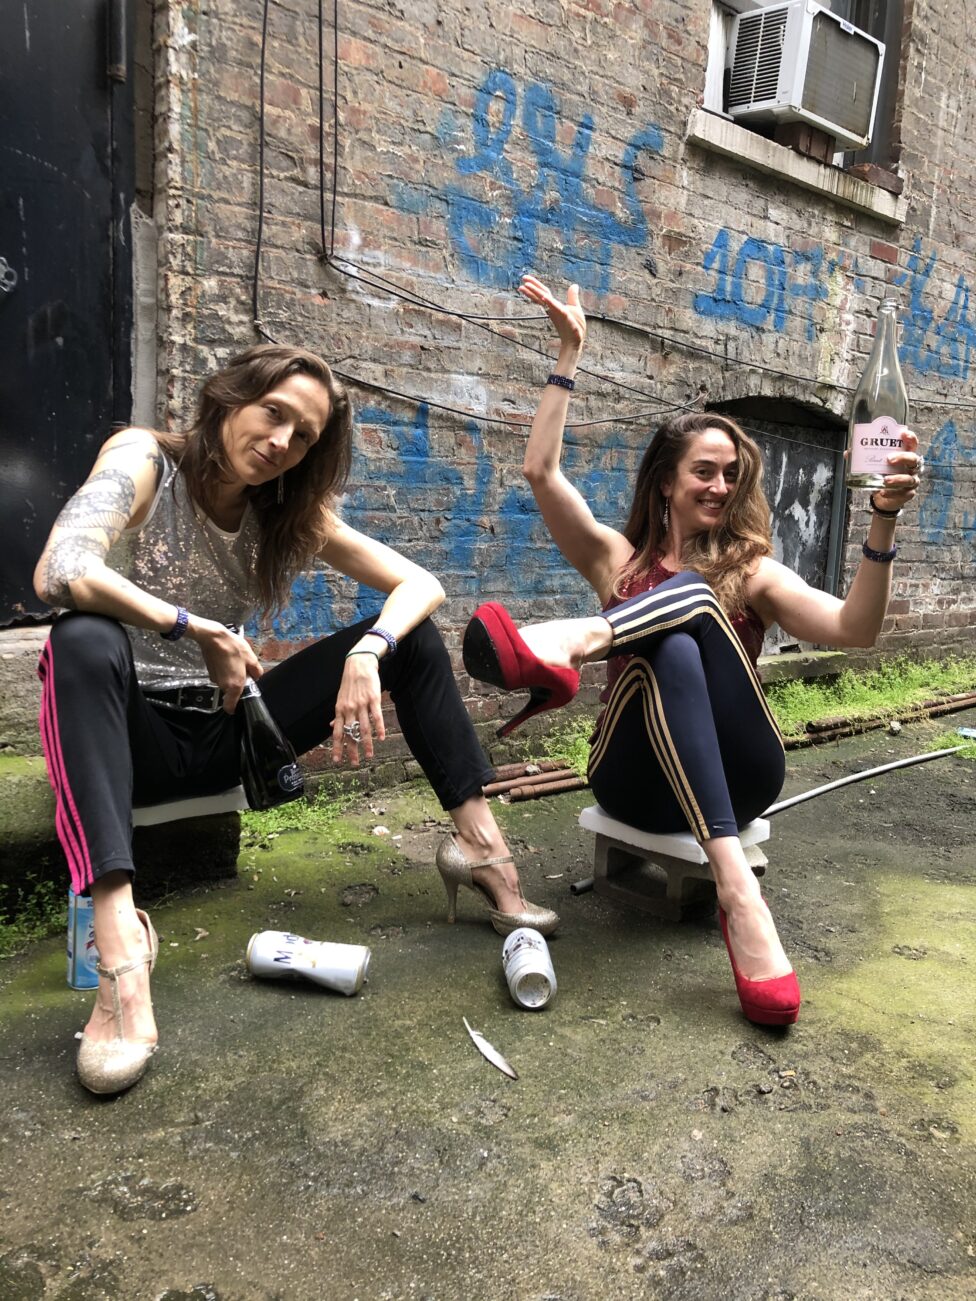 Catherine Cabeen and Kristina Berger in Glitter in the Gutter: The Morning After, 2021. Glitter in the Gutter is an ever-evolving 2-women comedy show, which ran from 2018-2023, that uses camp and irony to shimmy struggles into laughter.